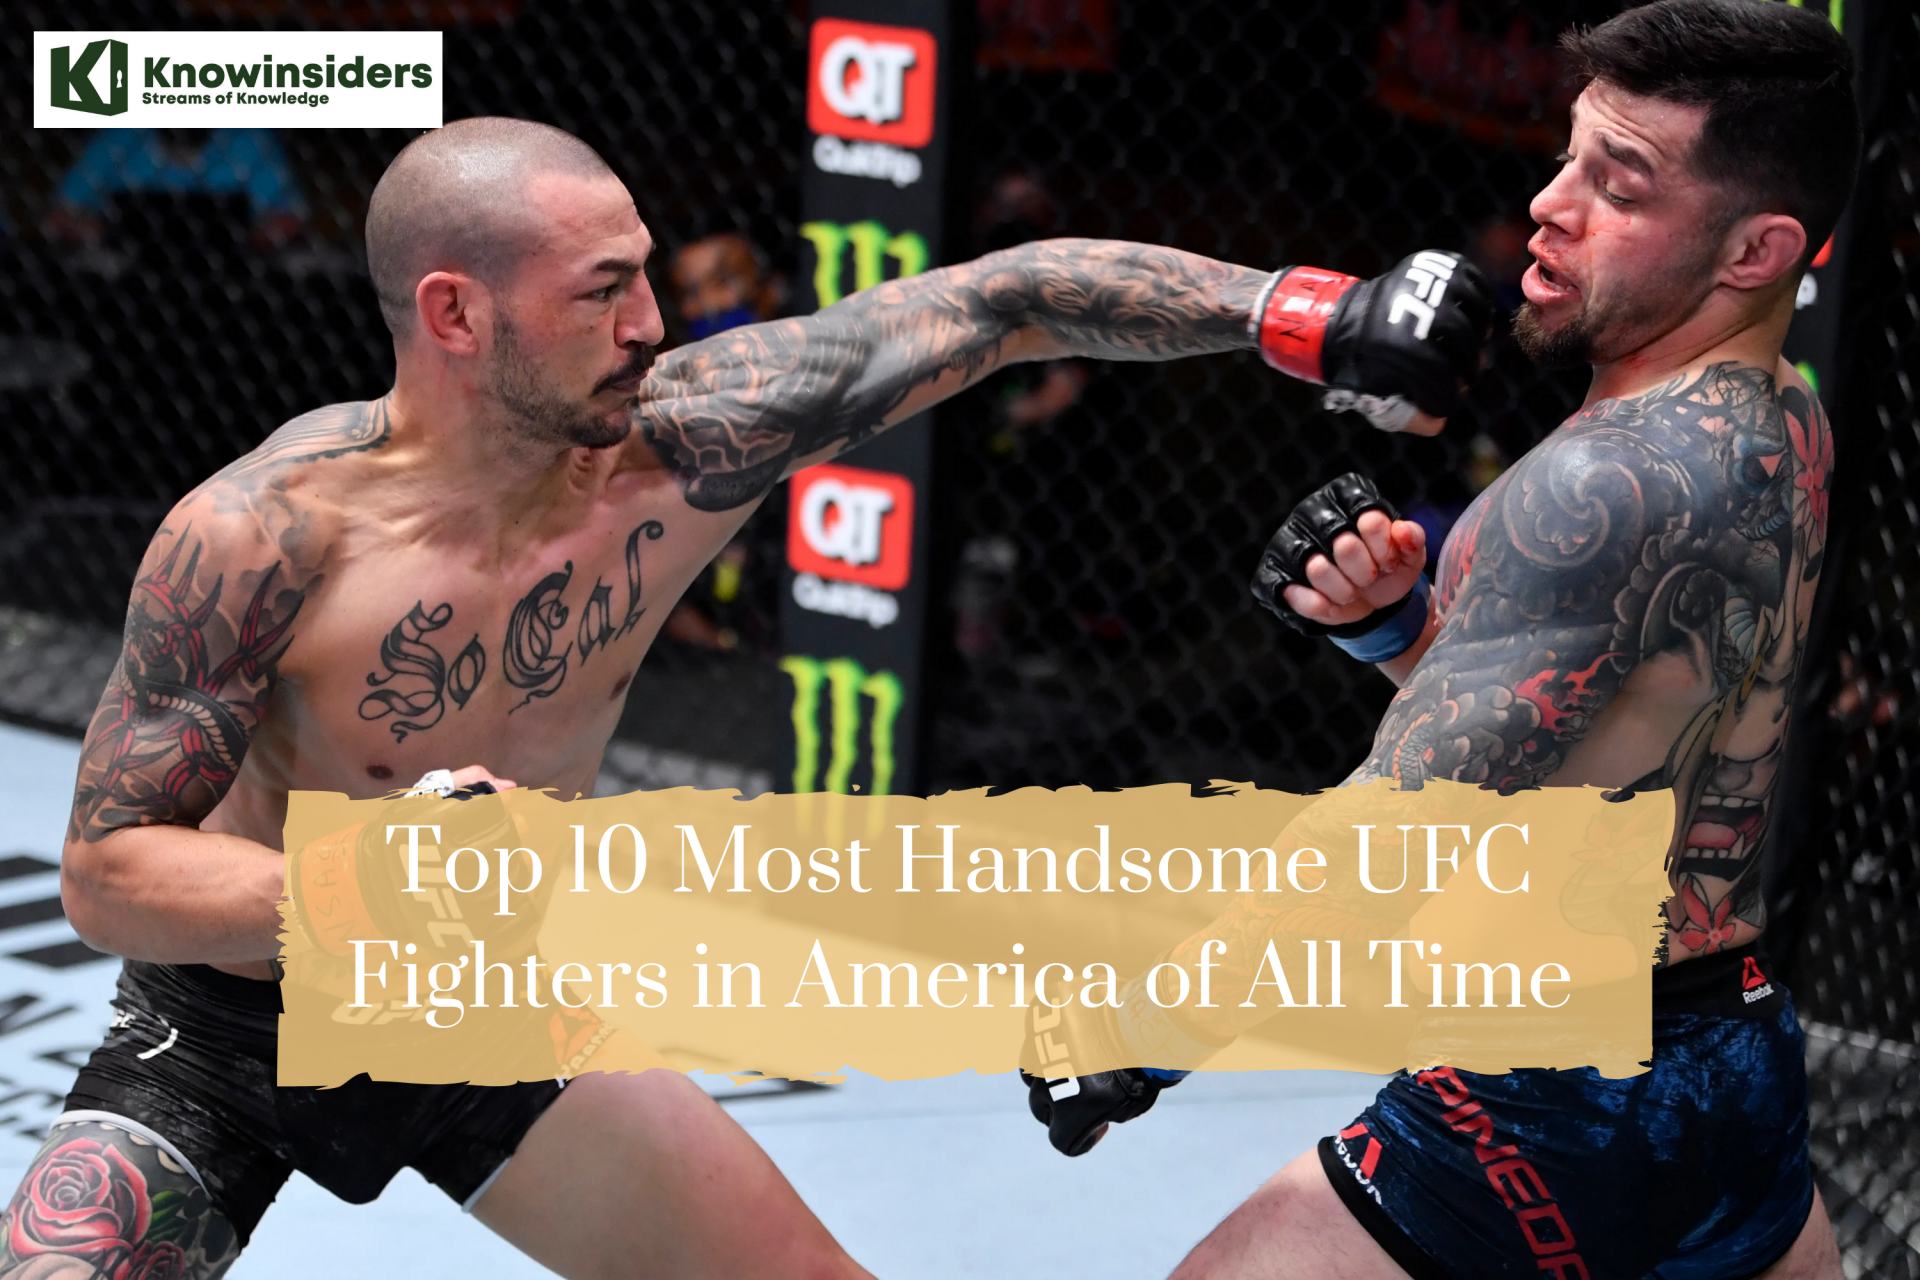 Top 10 Most Handsome UFC Fighters in America of All Time